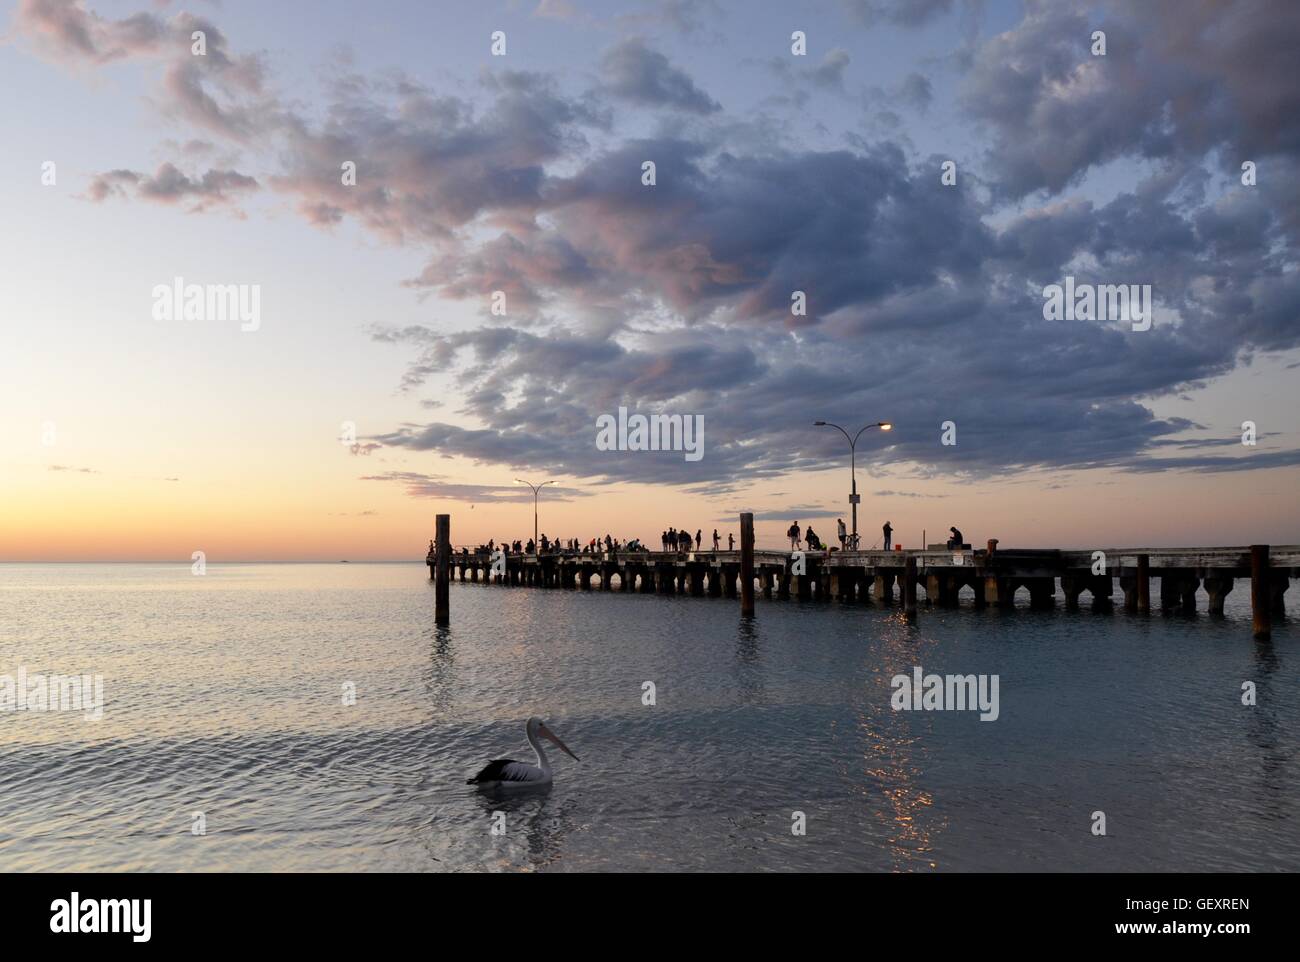 Coogee,WA,Australia-October 25,2015:Jetty,fisherman in silhouette, and pelican at sunset in the Indian Ocean at Coogee Beach,Coogee,Western Australia Stock Photo